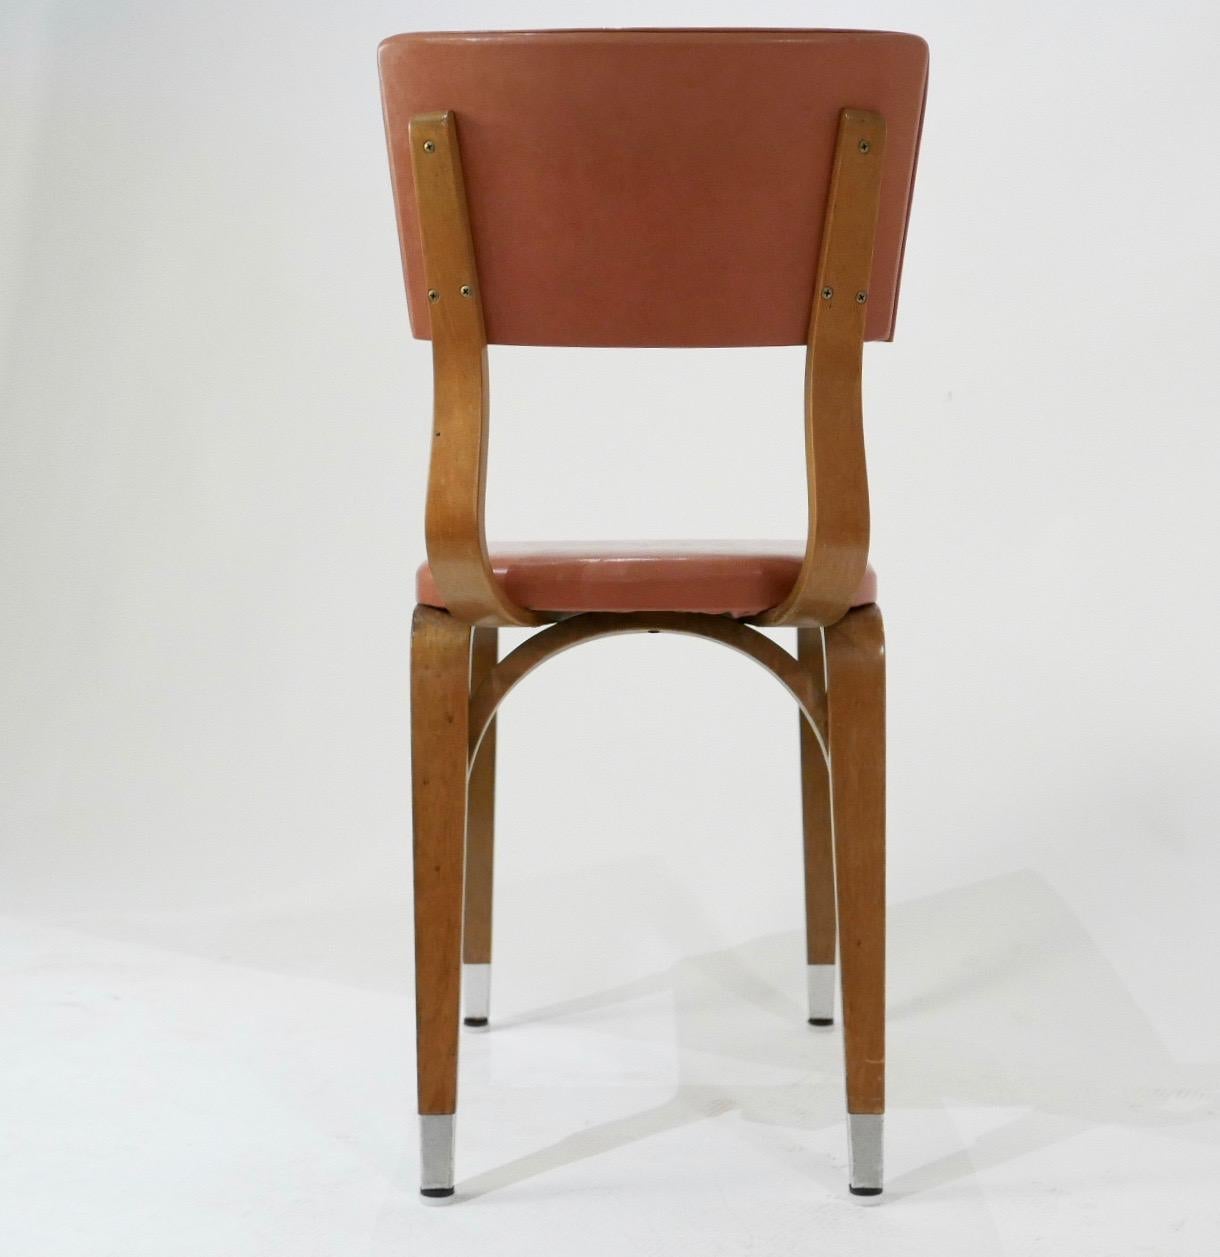 Austrian 1950s Thonet Bentwood Bent Plywood Dining, Cafe or Desk Chairs,